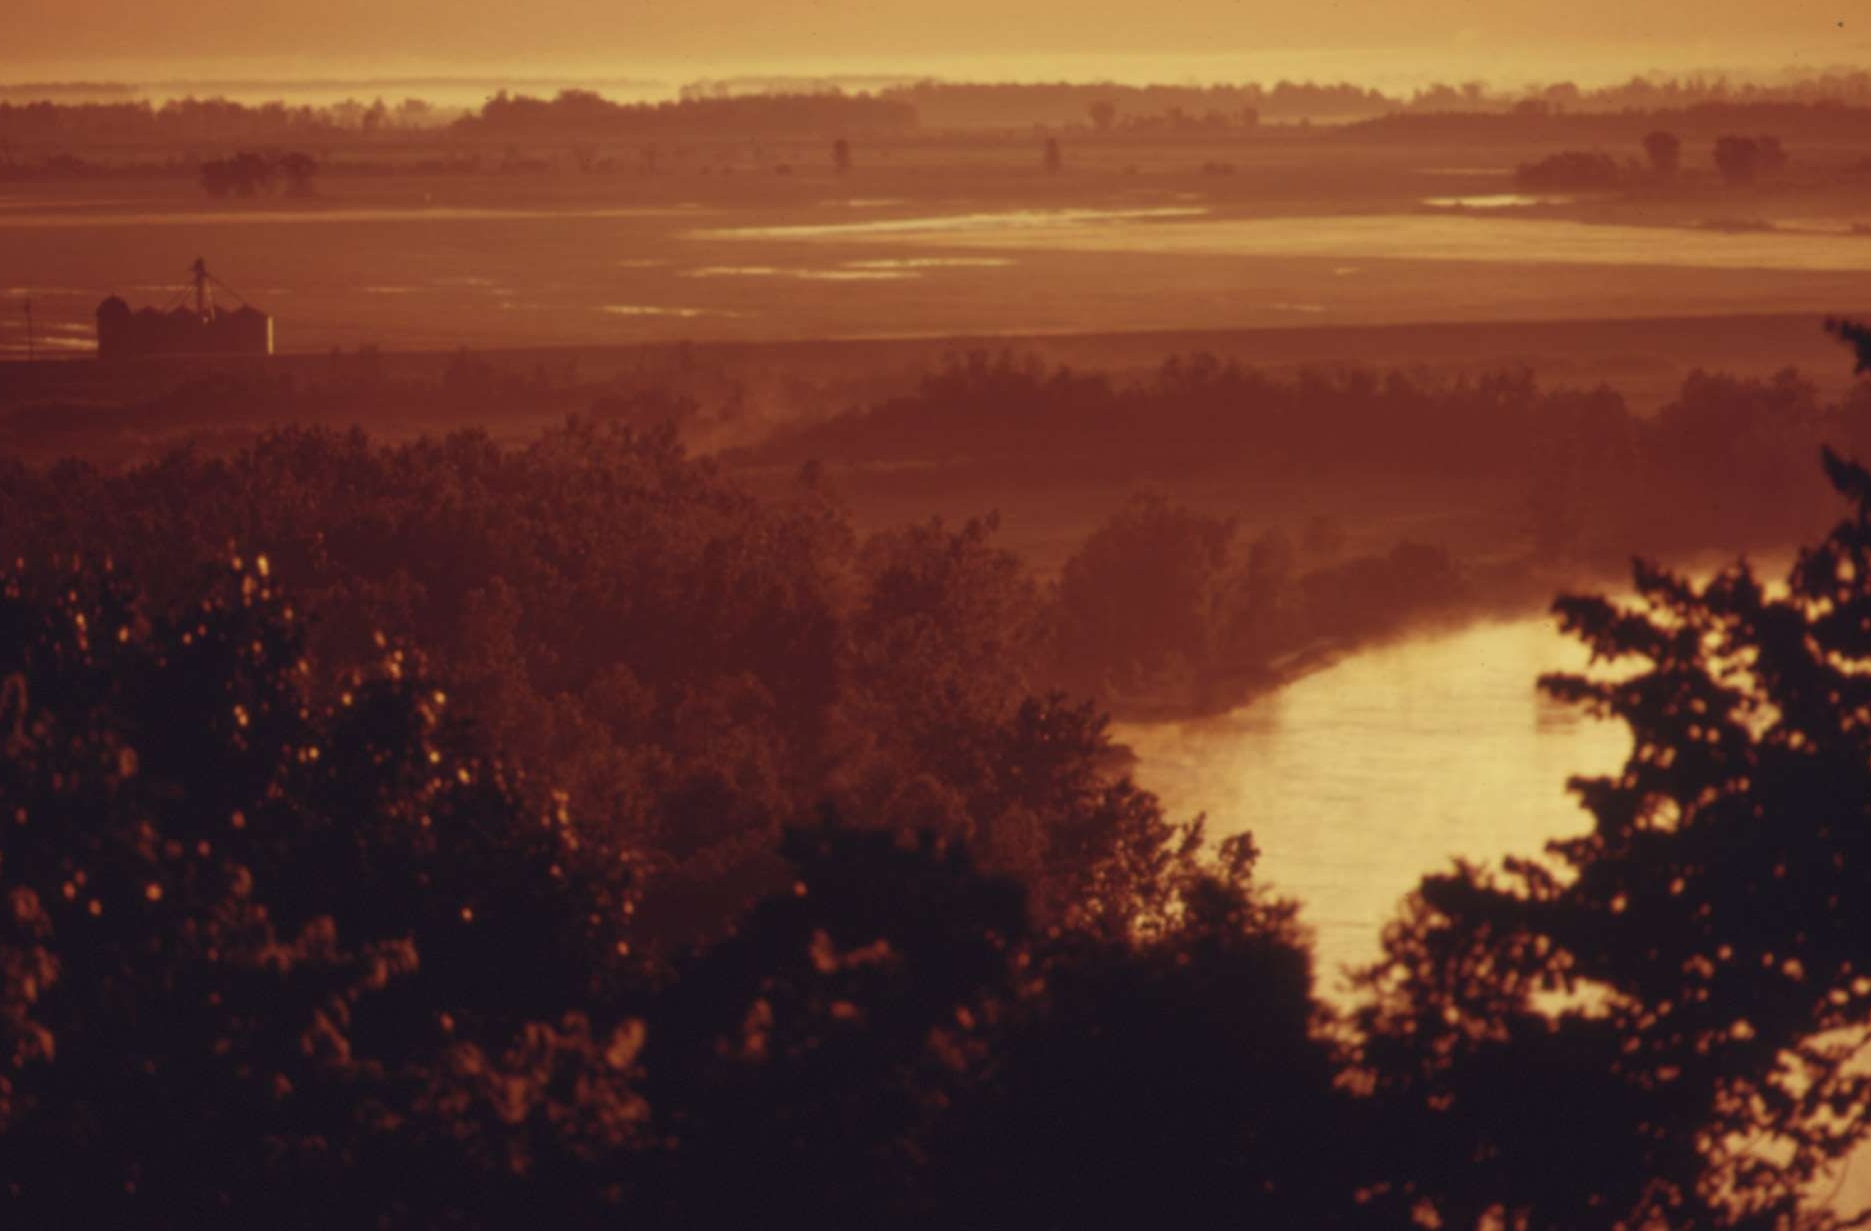 Early Morning View of the Missouri River